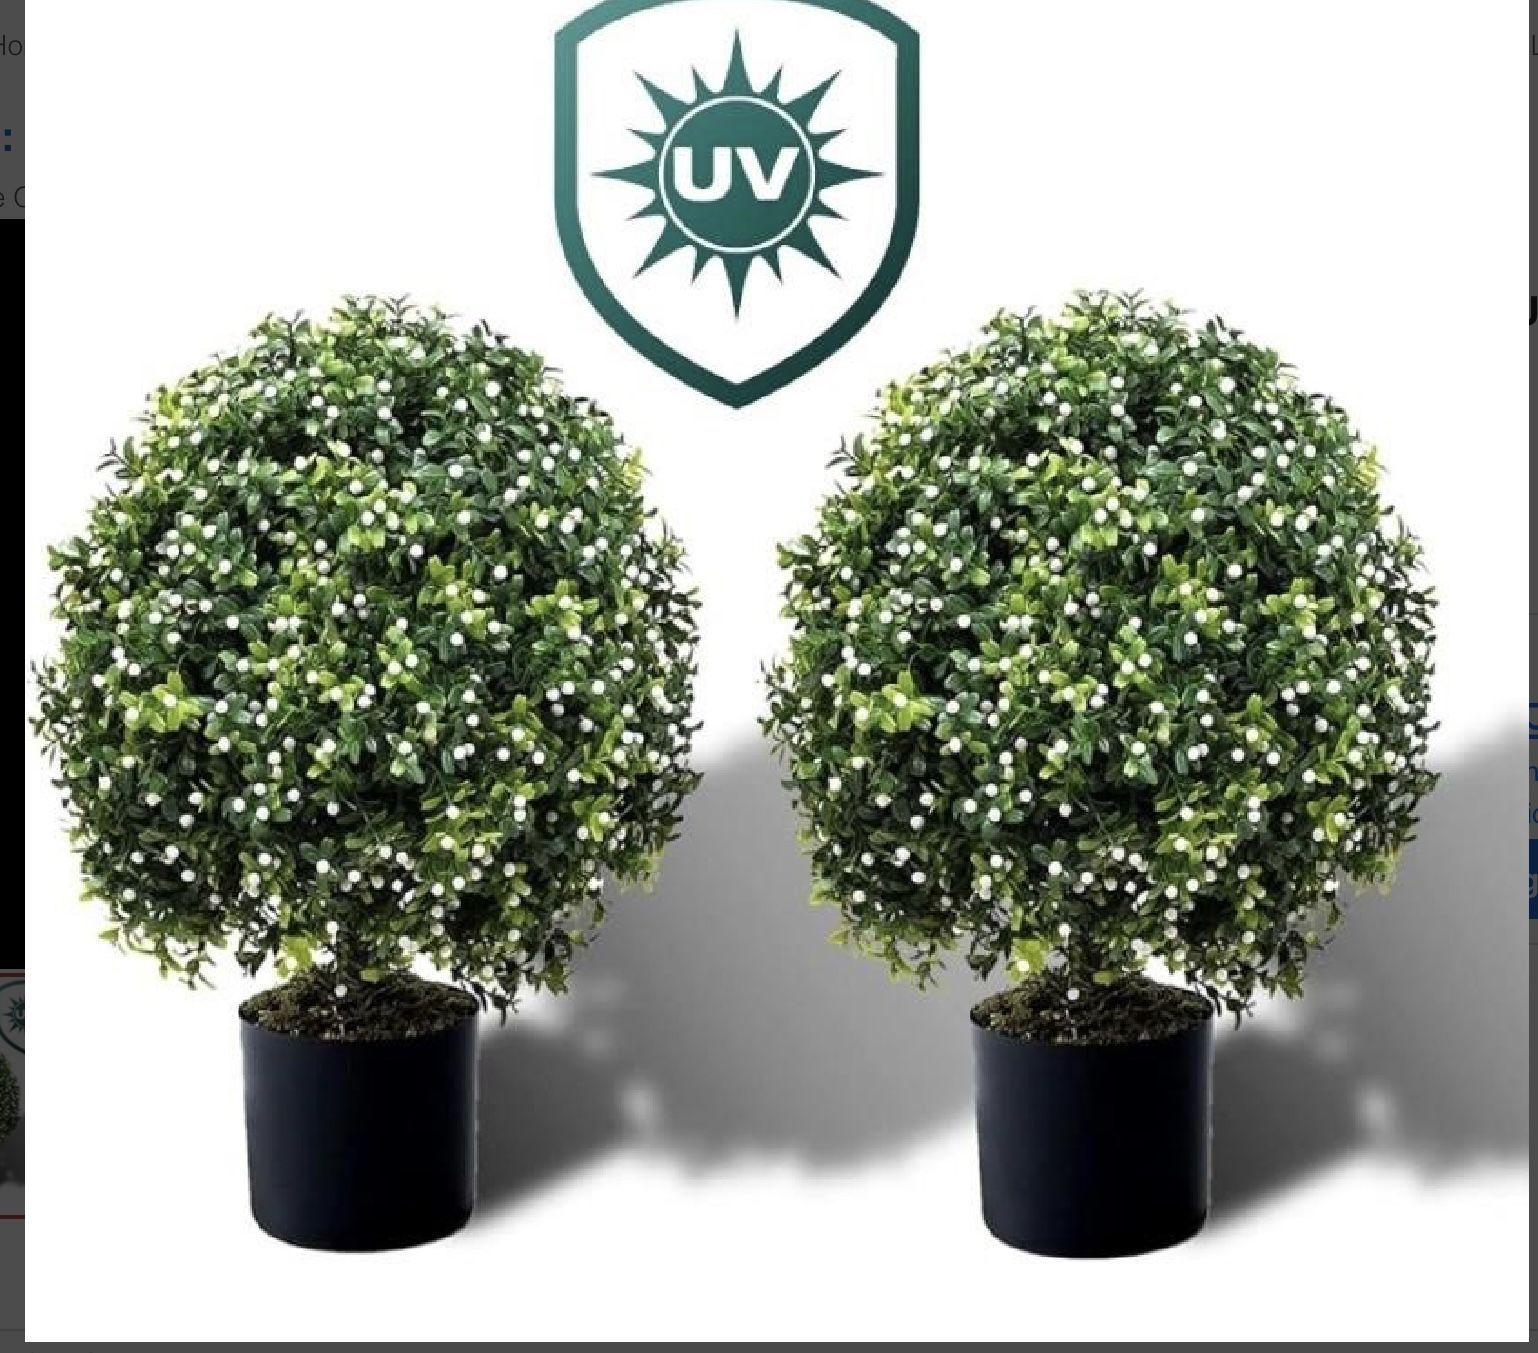 Set Of 2 Pre Potted Artificial Boxwood White Anti UV 24 “